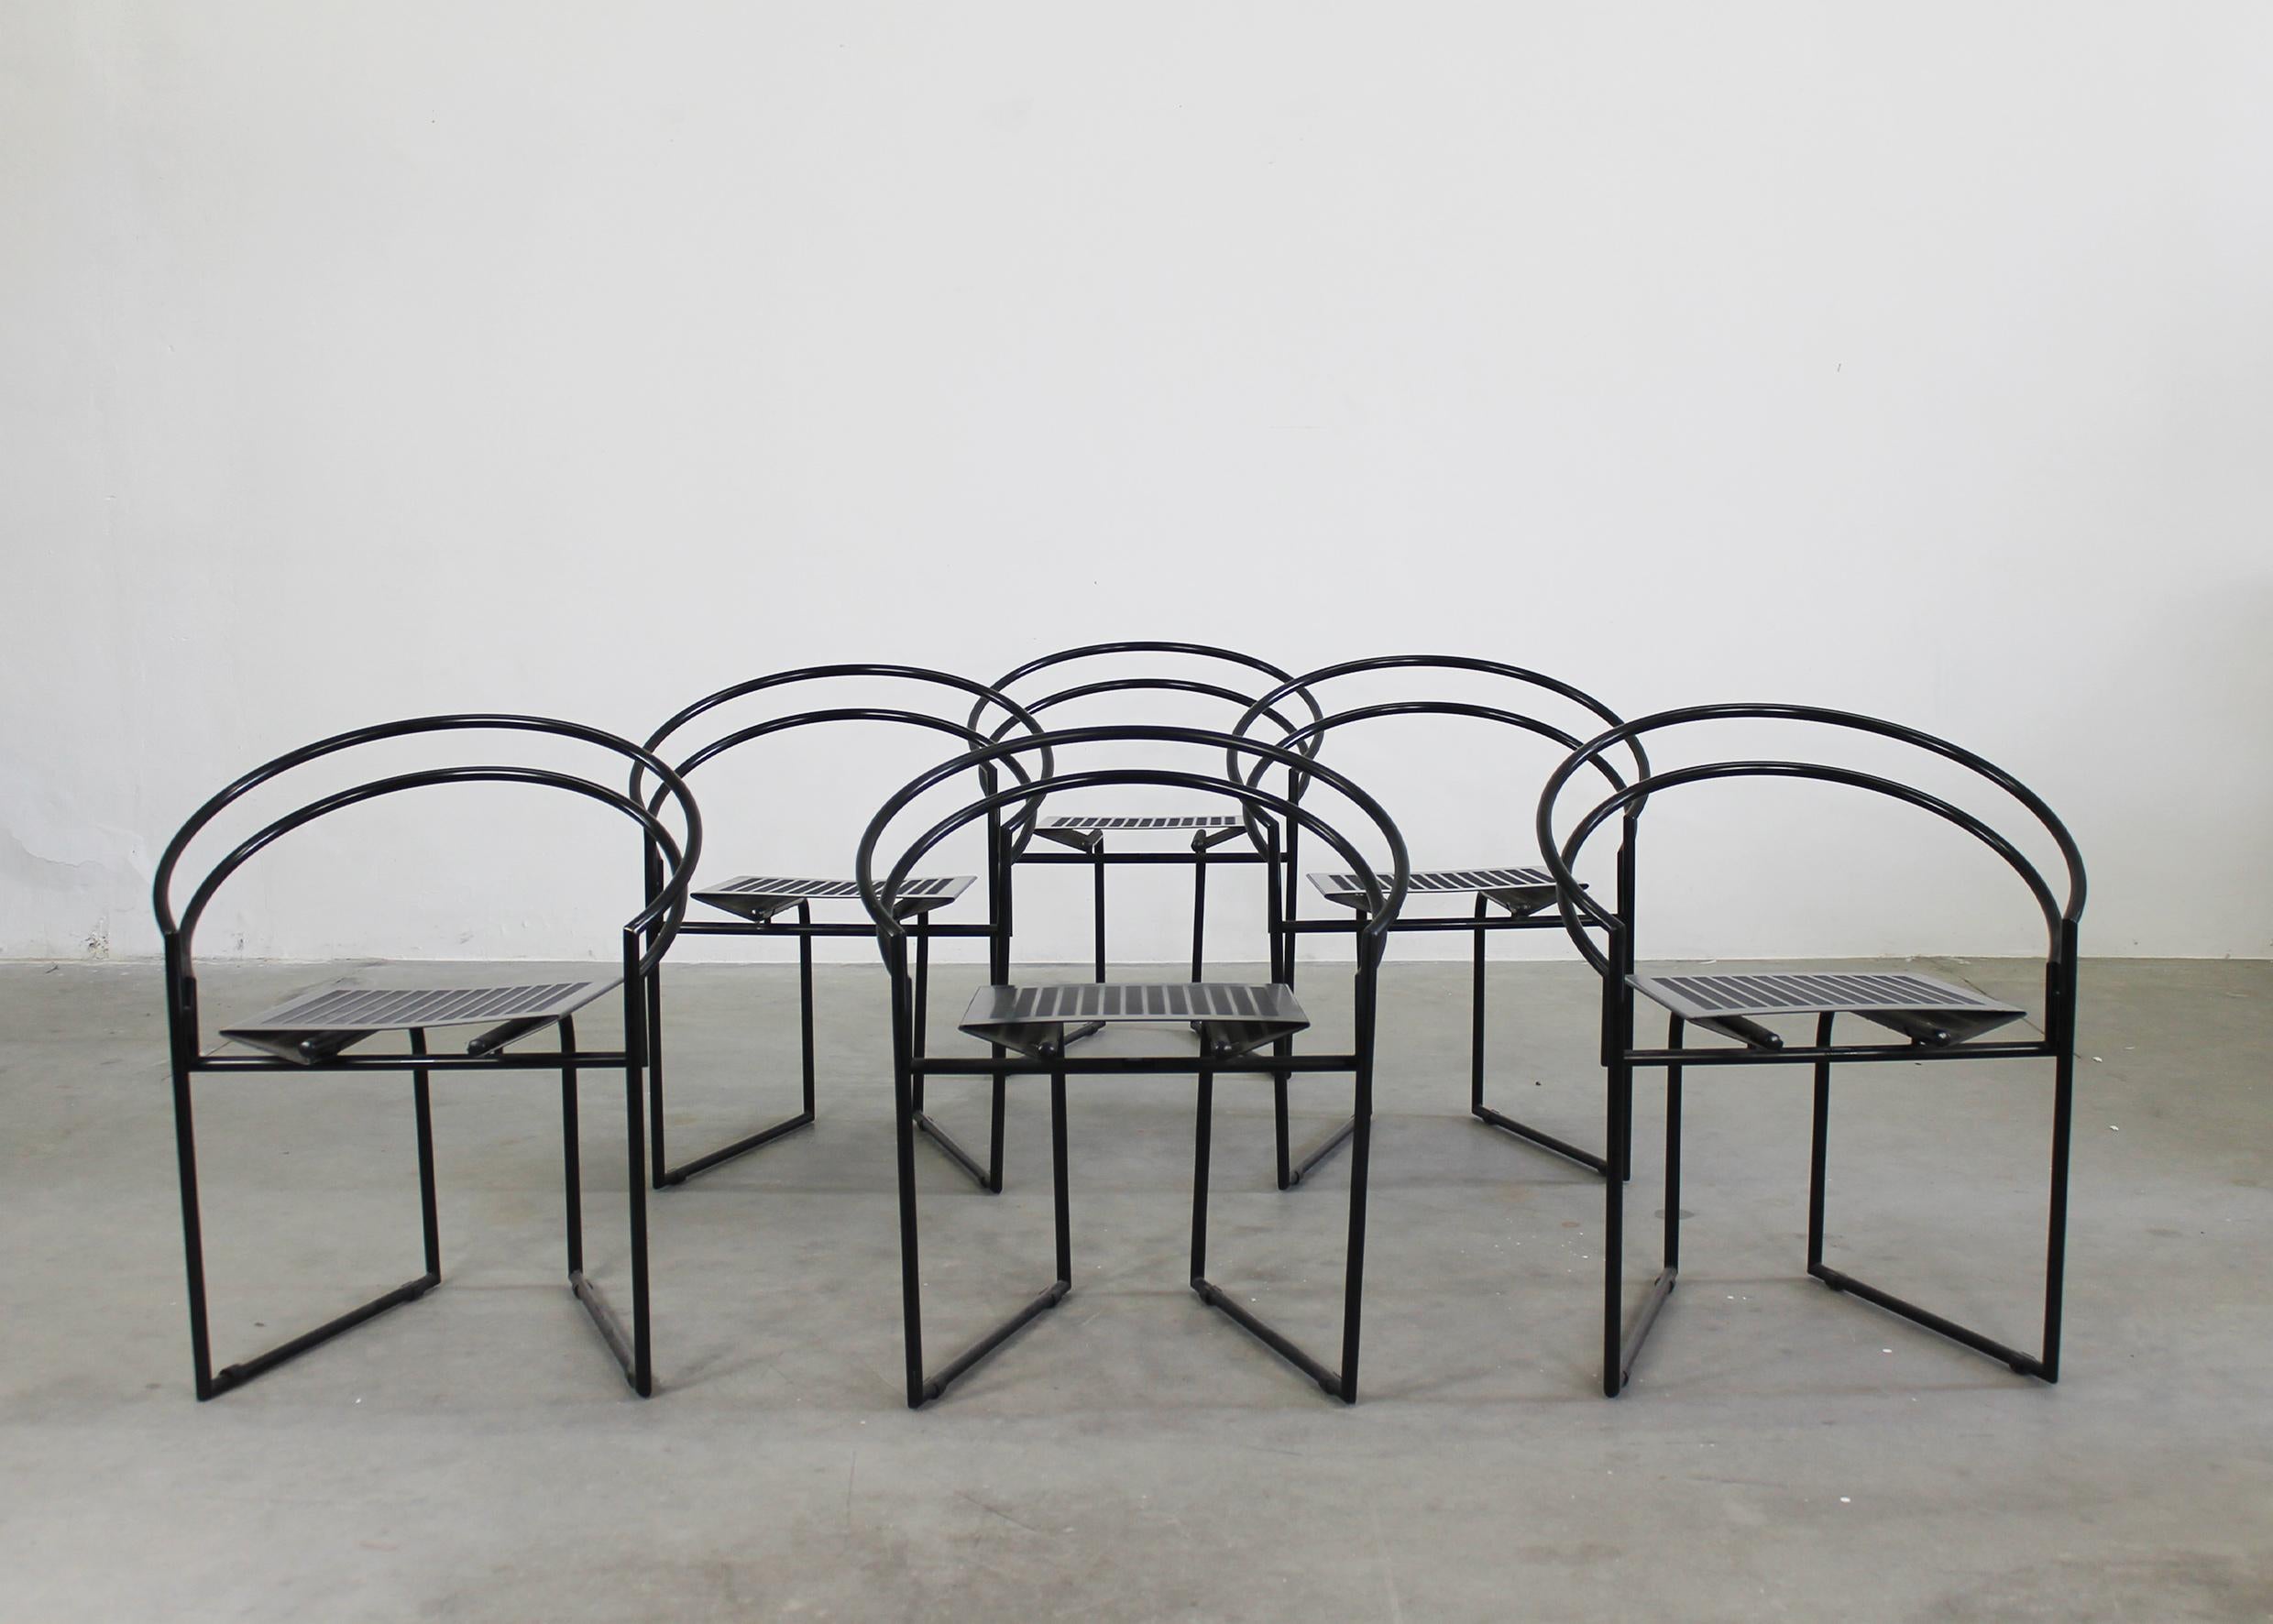 Modern Mario Botta Set of Six La Tonda Chairs in Black Lacquered Metal by Alias 1980s For Sale